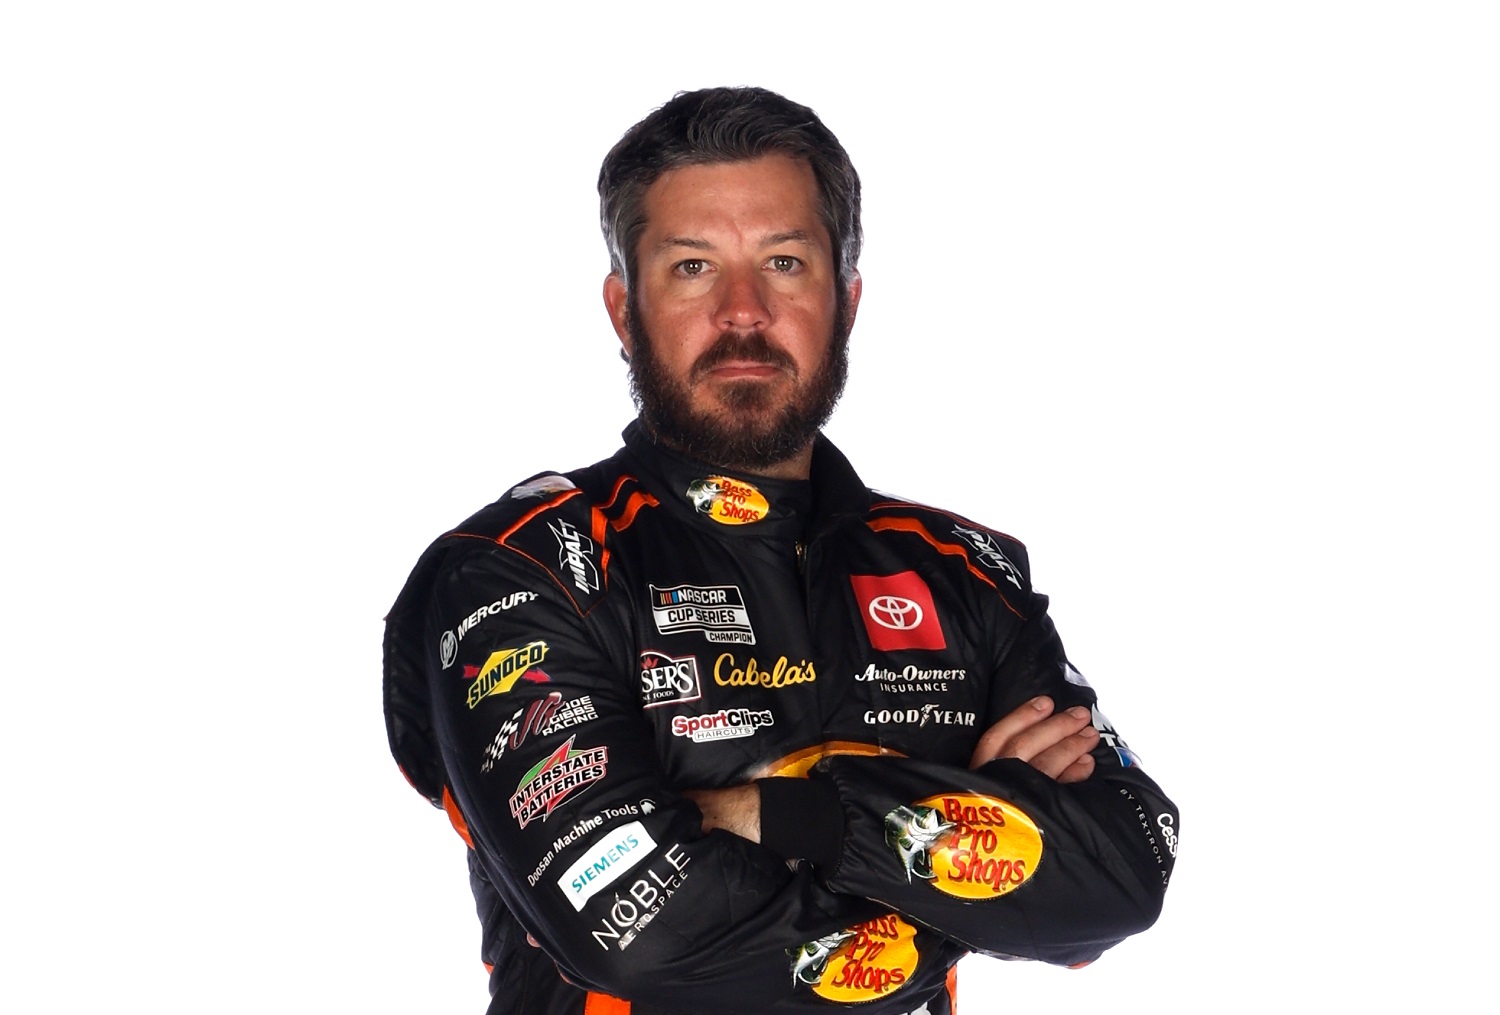 NASCAR driver Martin Truex Jr. poses for a photo during NASCAR Production Days at Clutch Studios on Jan. 18, 2022 in Concord, North Carolina. | Chris Graythen/Getty Images